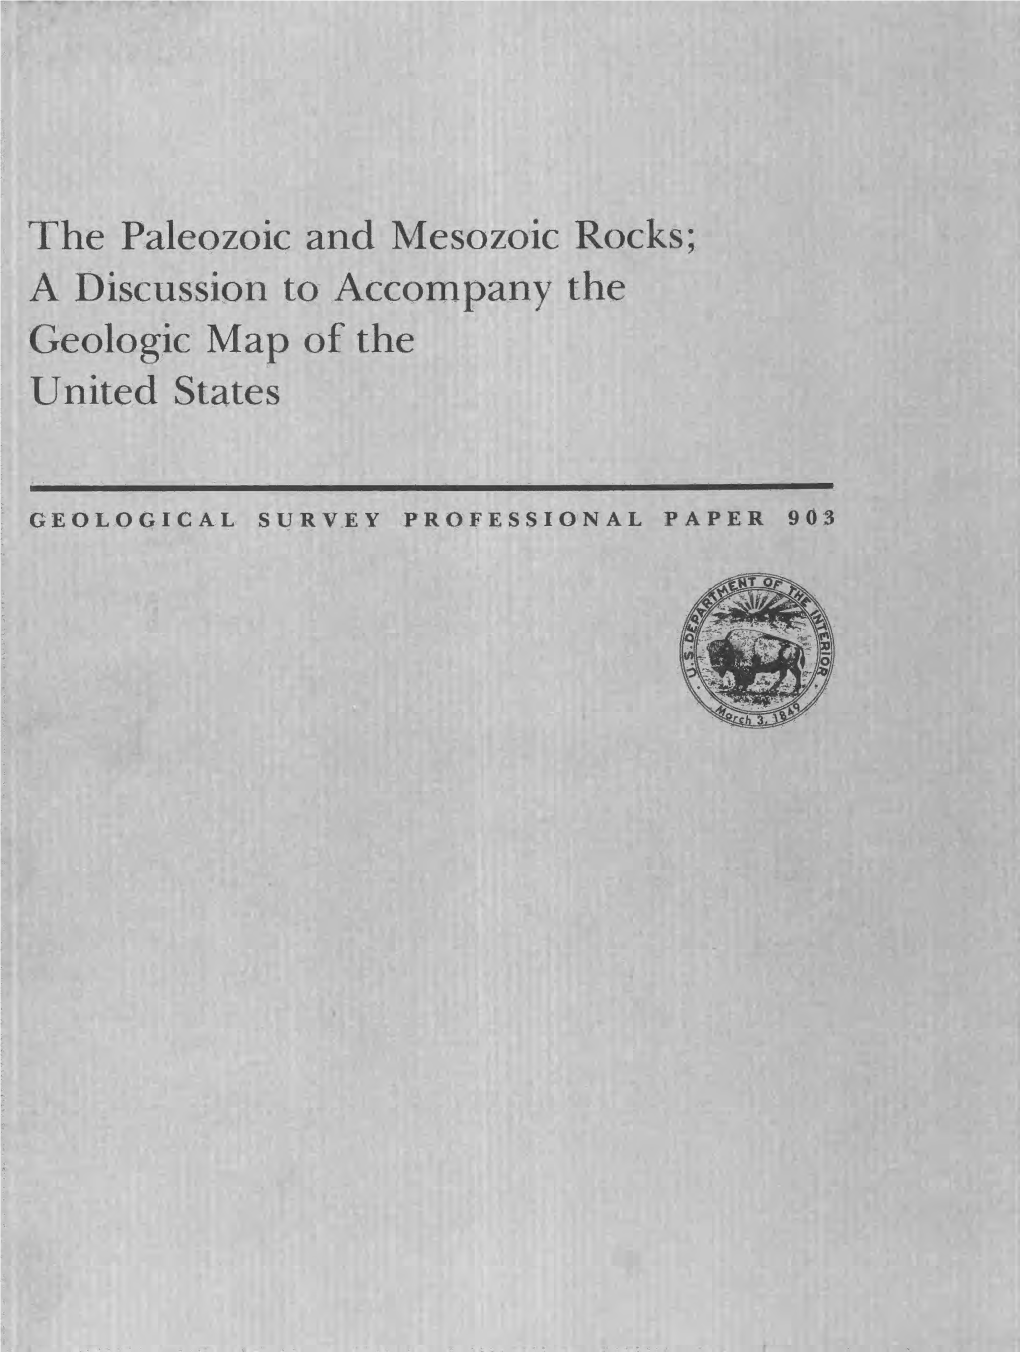 The Paleozoic and Mesozoic Rocks; a Discussion to Accompany the Geologic Map of the United States